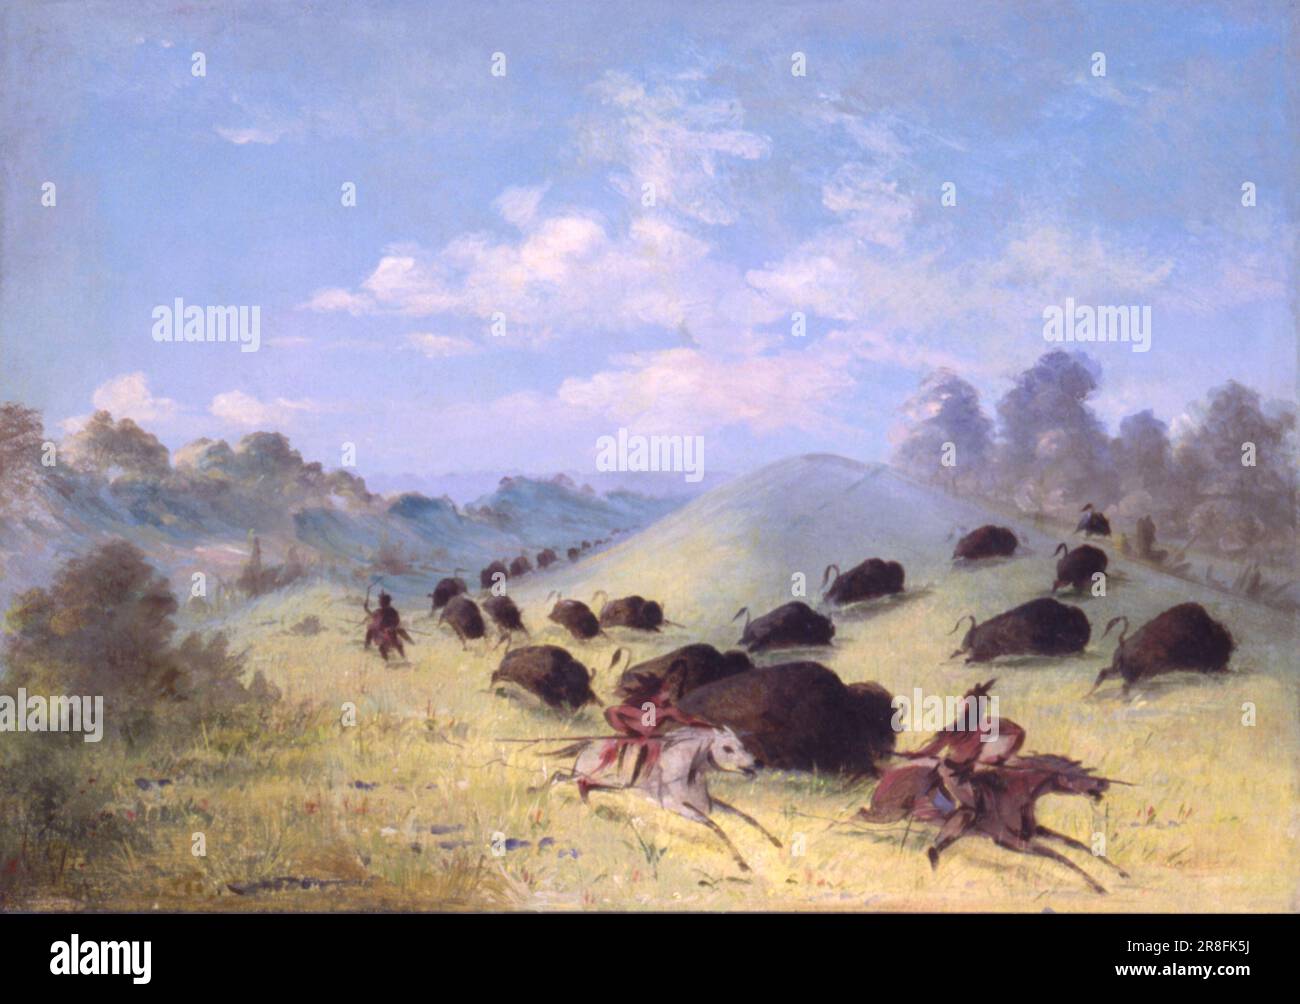 Comanche Indians Chasing Buffalo with Lances and Bows 1846-1848 by George Catlin, born Wilkes-Barre, PA 1796-died Jersey City, NJ 1872 Stock Photo